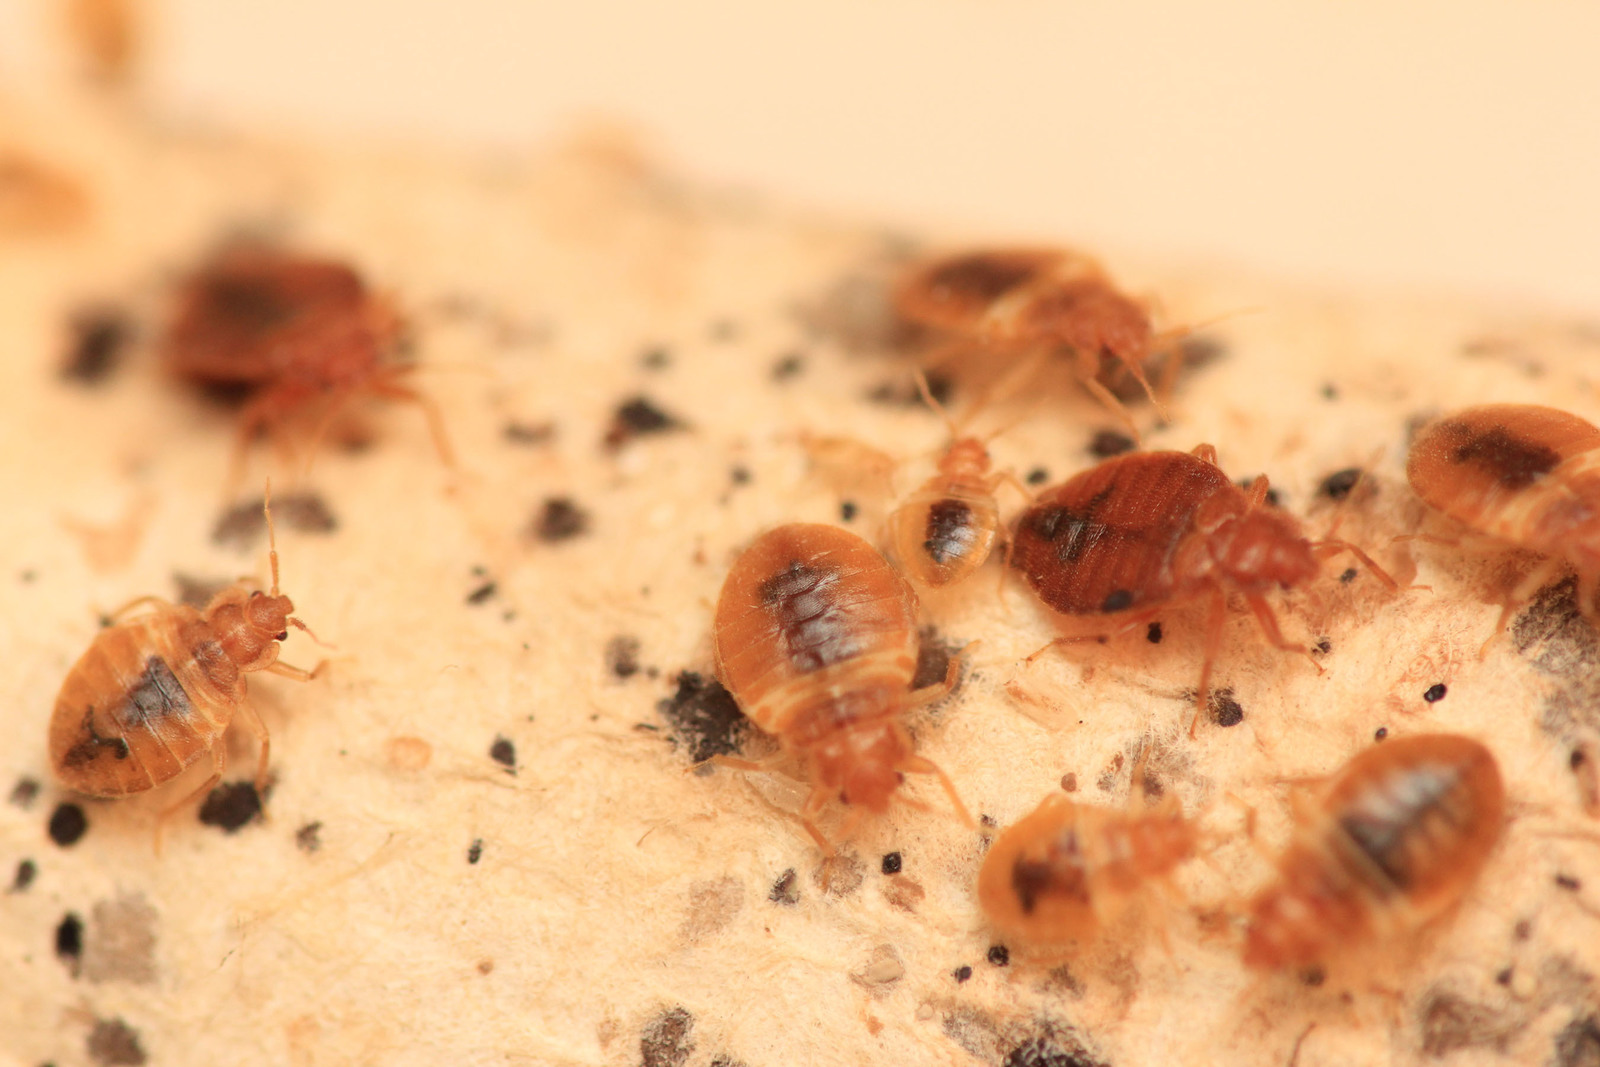 Baltimore tops Orkin's 2017 list of Top 50 Bed Bug Cities. The list is based on Orkin treatment data from Dec. 1, 2015 - Nov. 30, 2016. Orkin's parent company, Rollins, Inc., reports a 10 percent increase in bed bug revenue over the past year. (PRNewsFoto/Orkin, LLC)